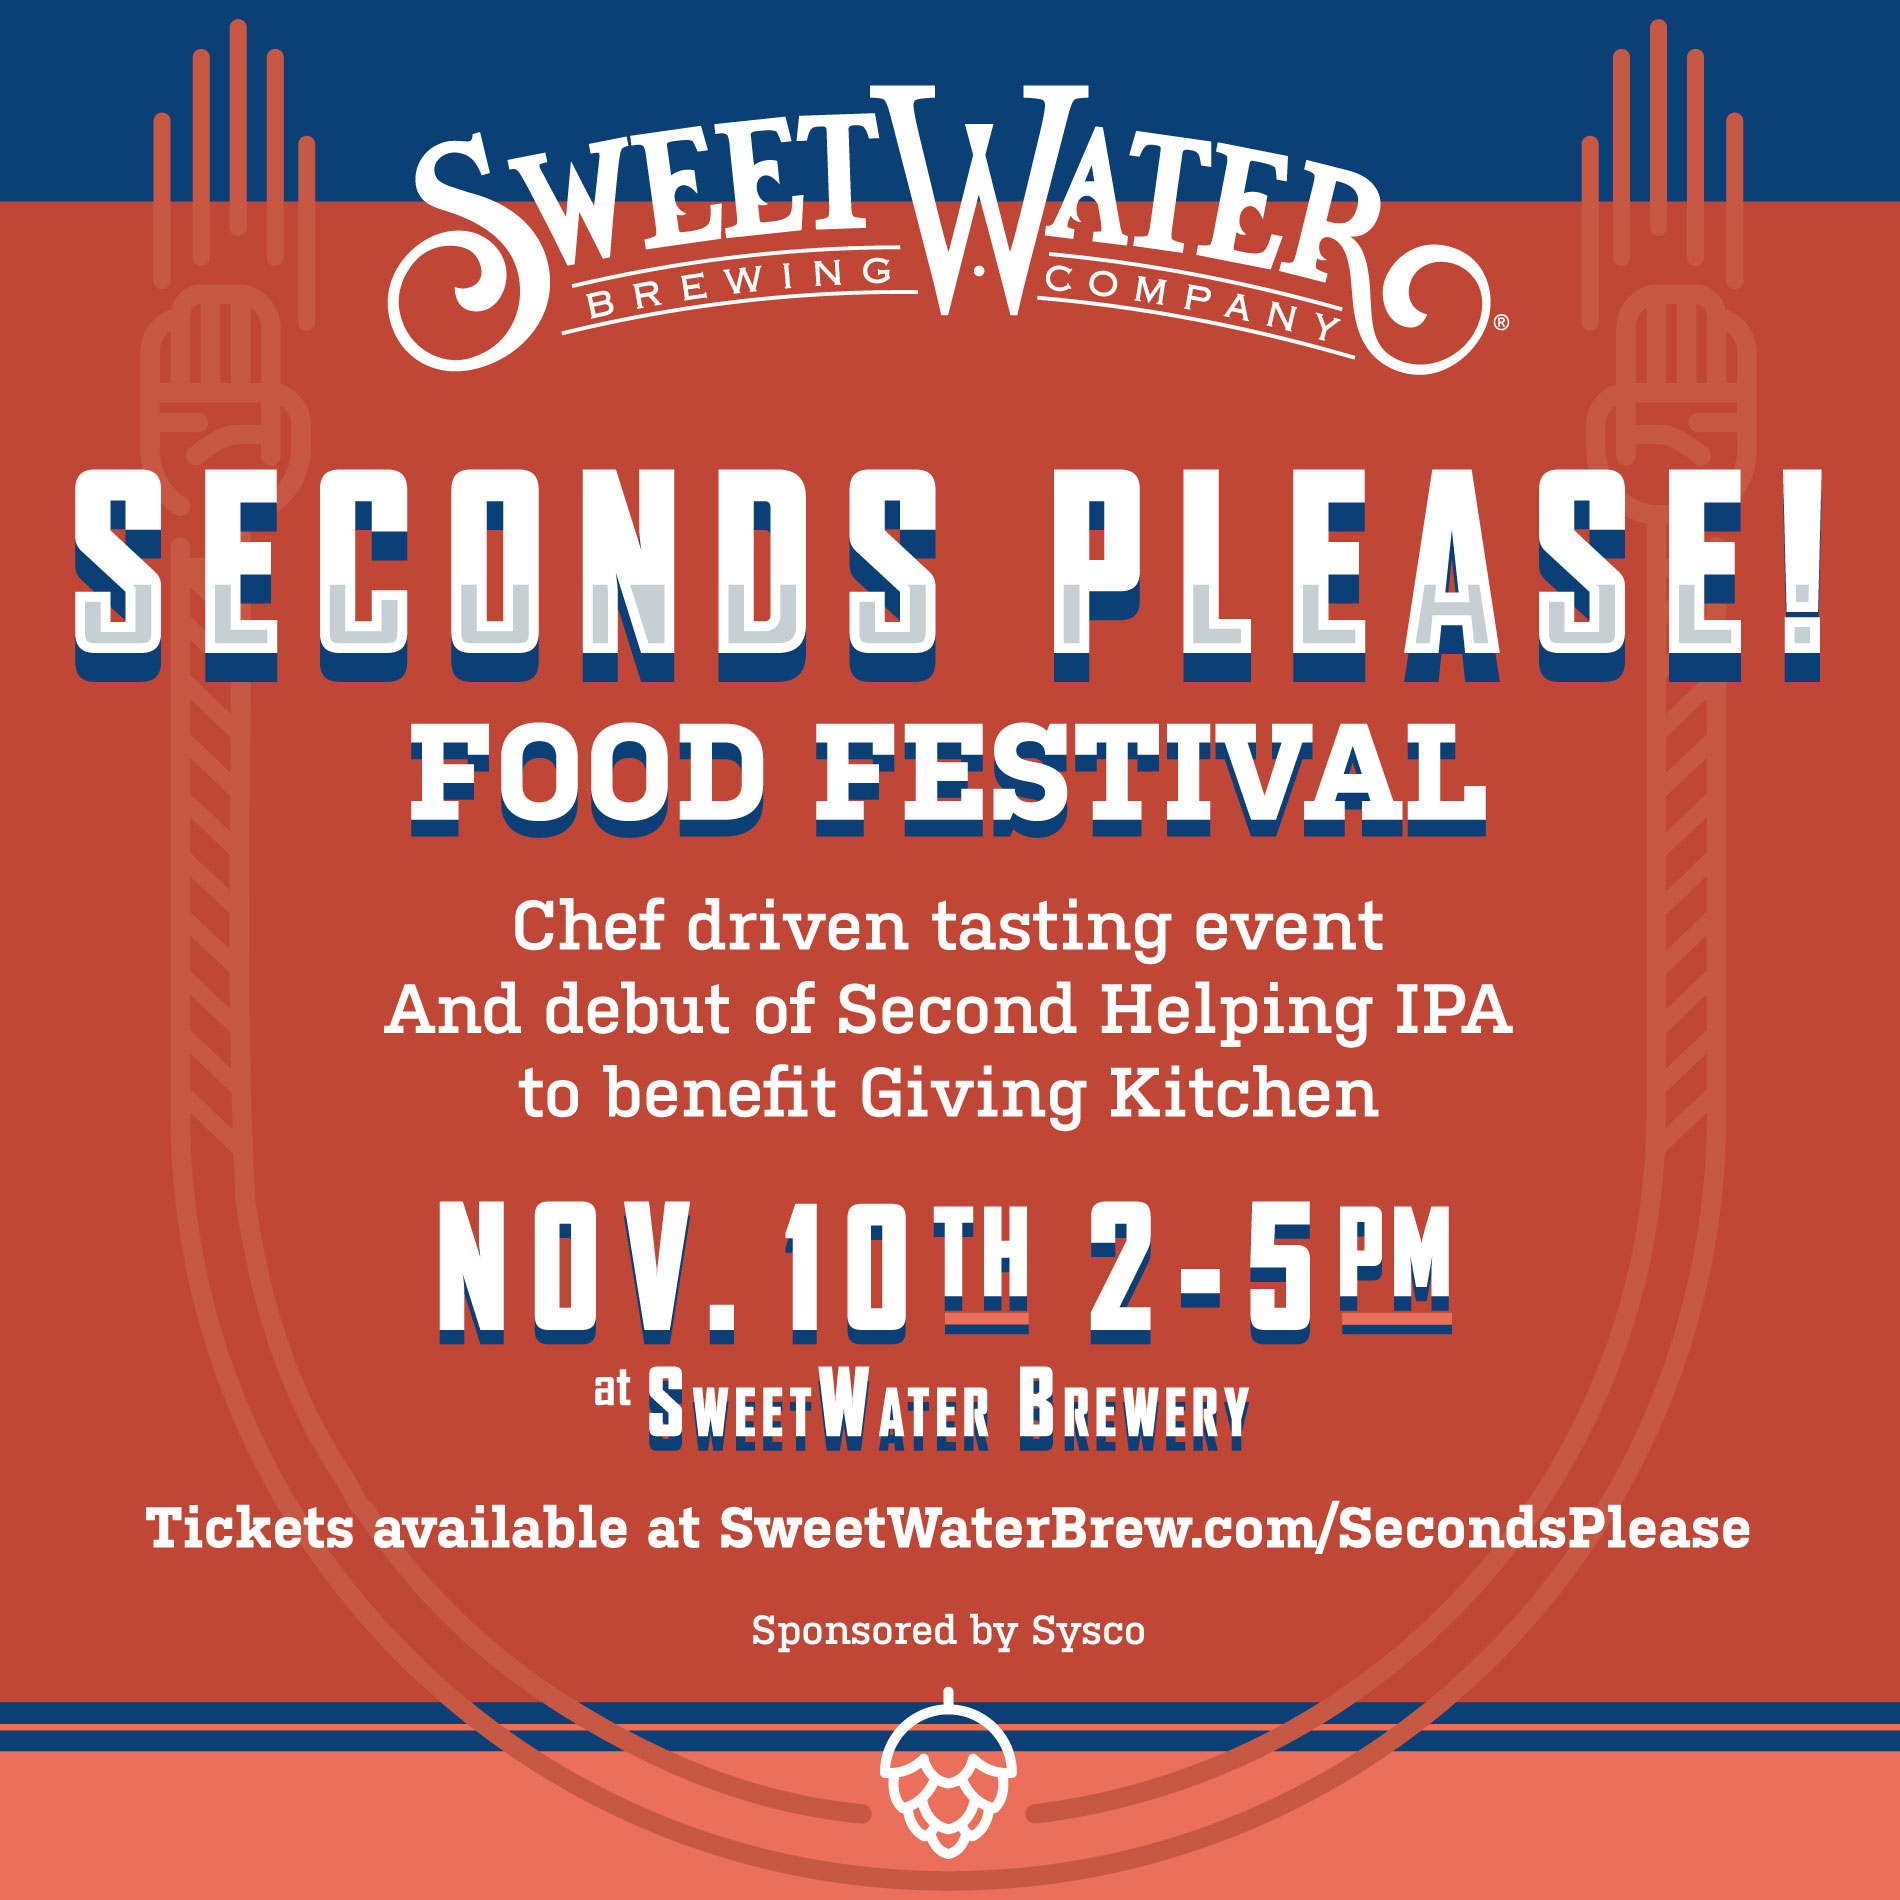 Sweetwater Brewing Hosts 'Seconds Please' Food Festival